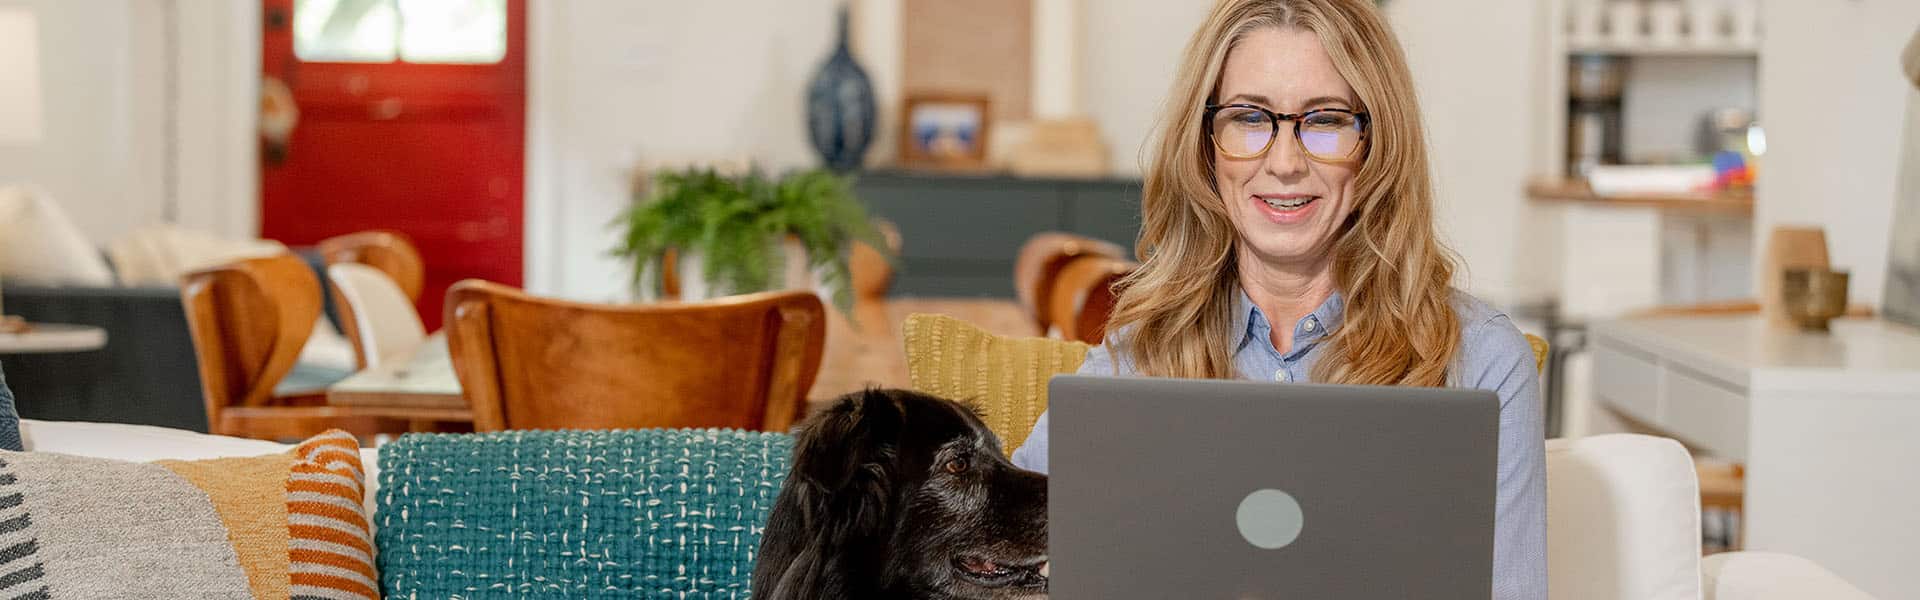 Woman working from home, dog sitting next to her